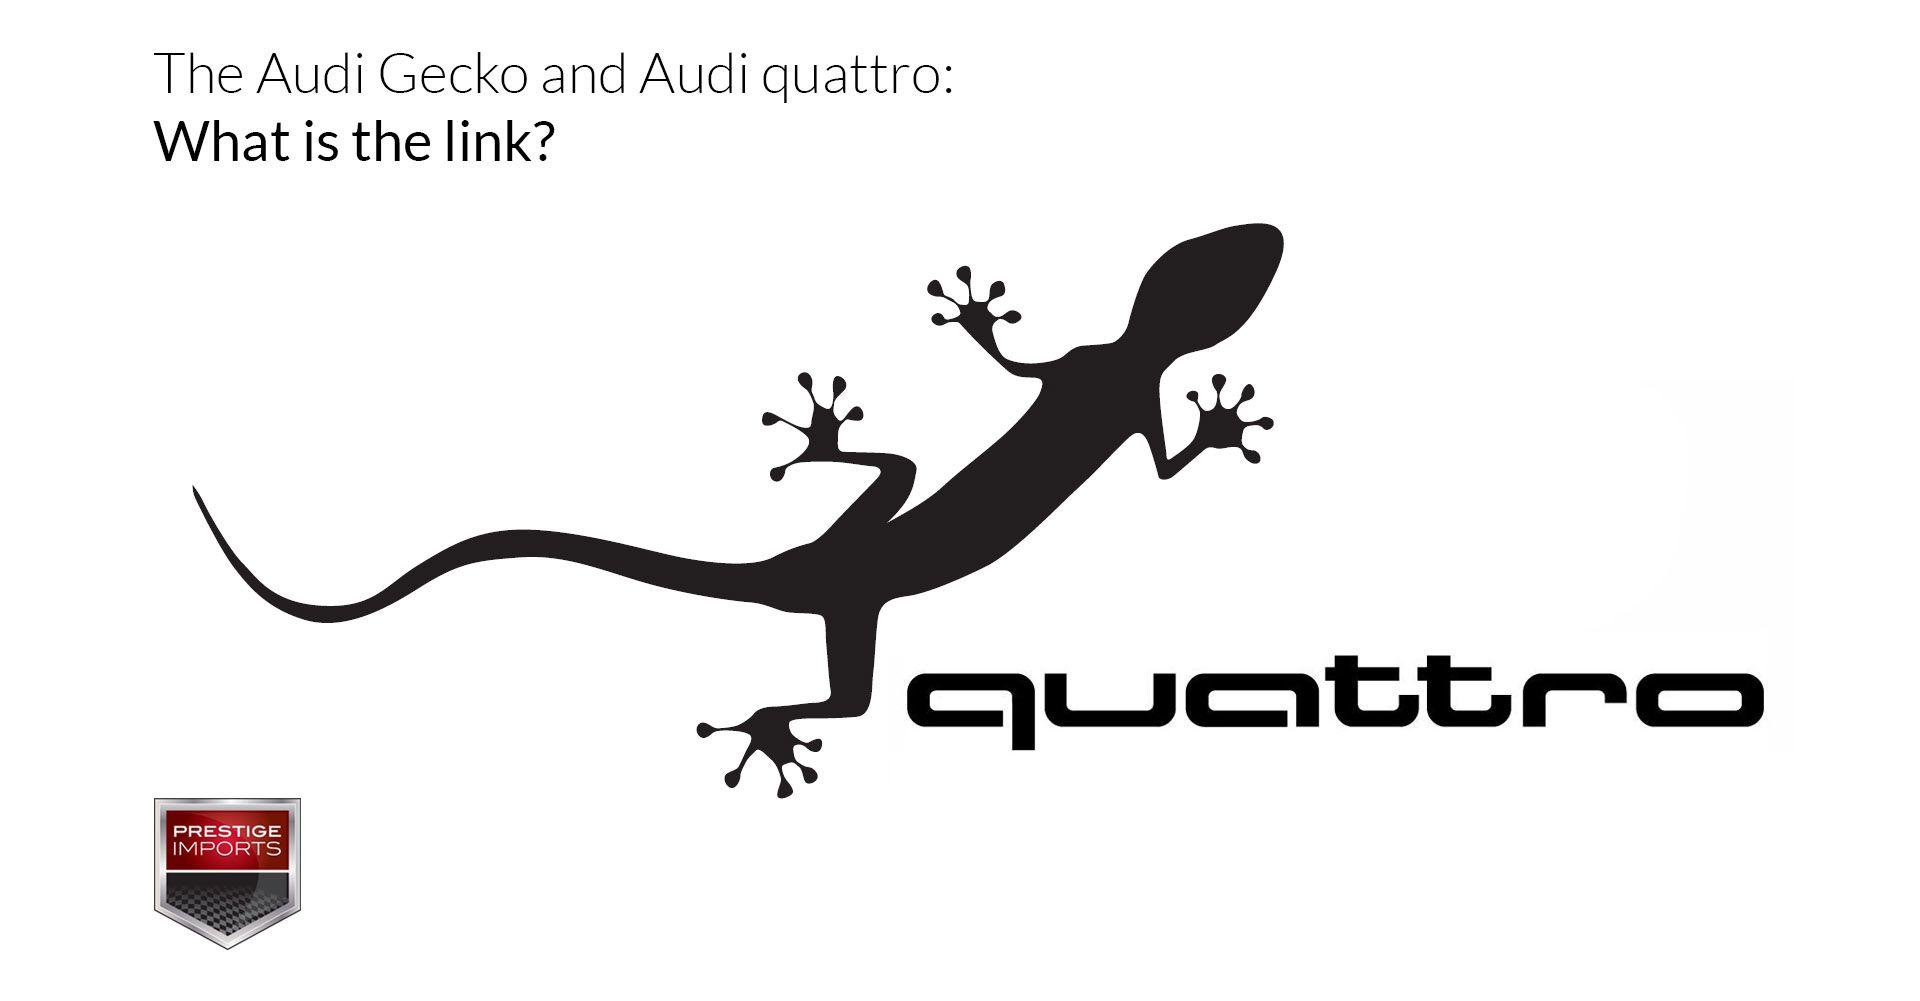 Gecko Logo - Audi gecko logo and Audi quattro: What is the link?